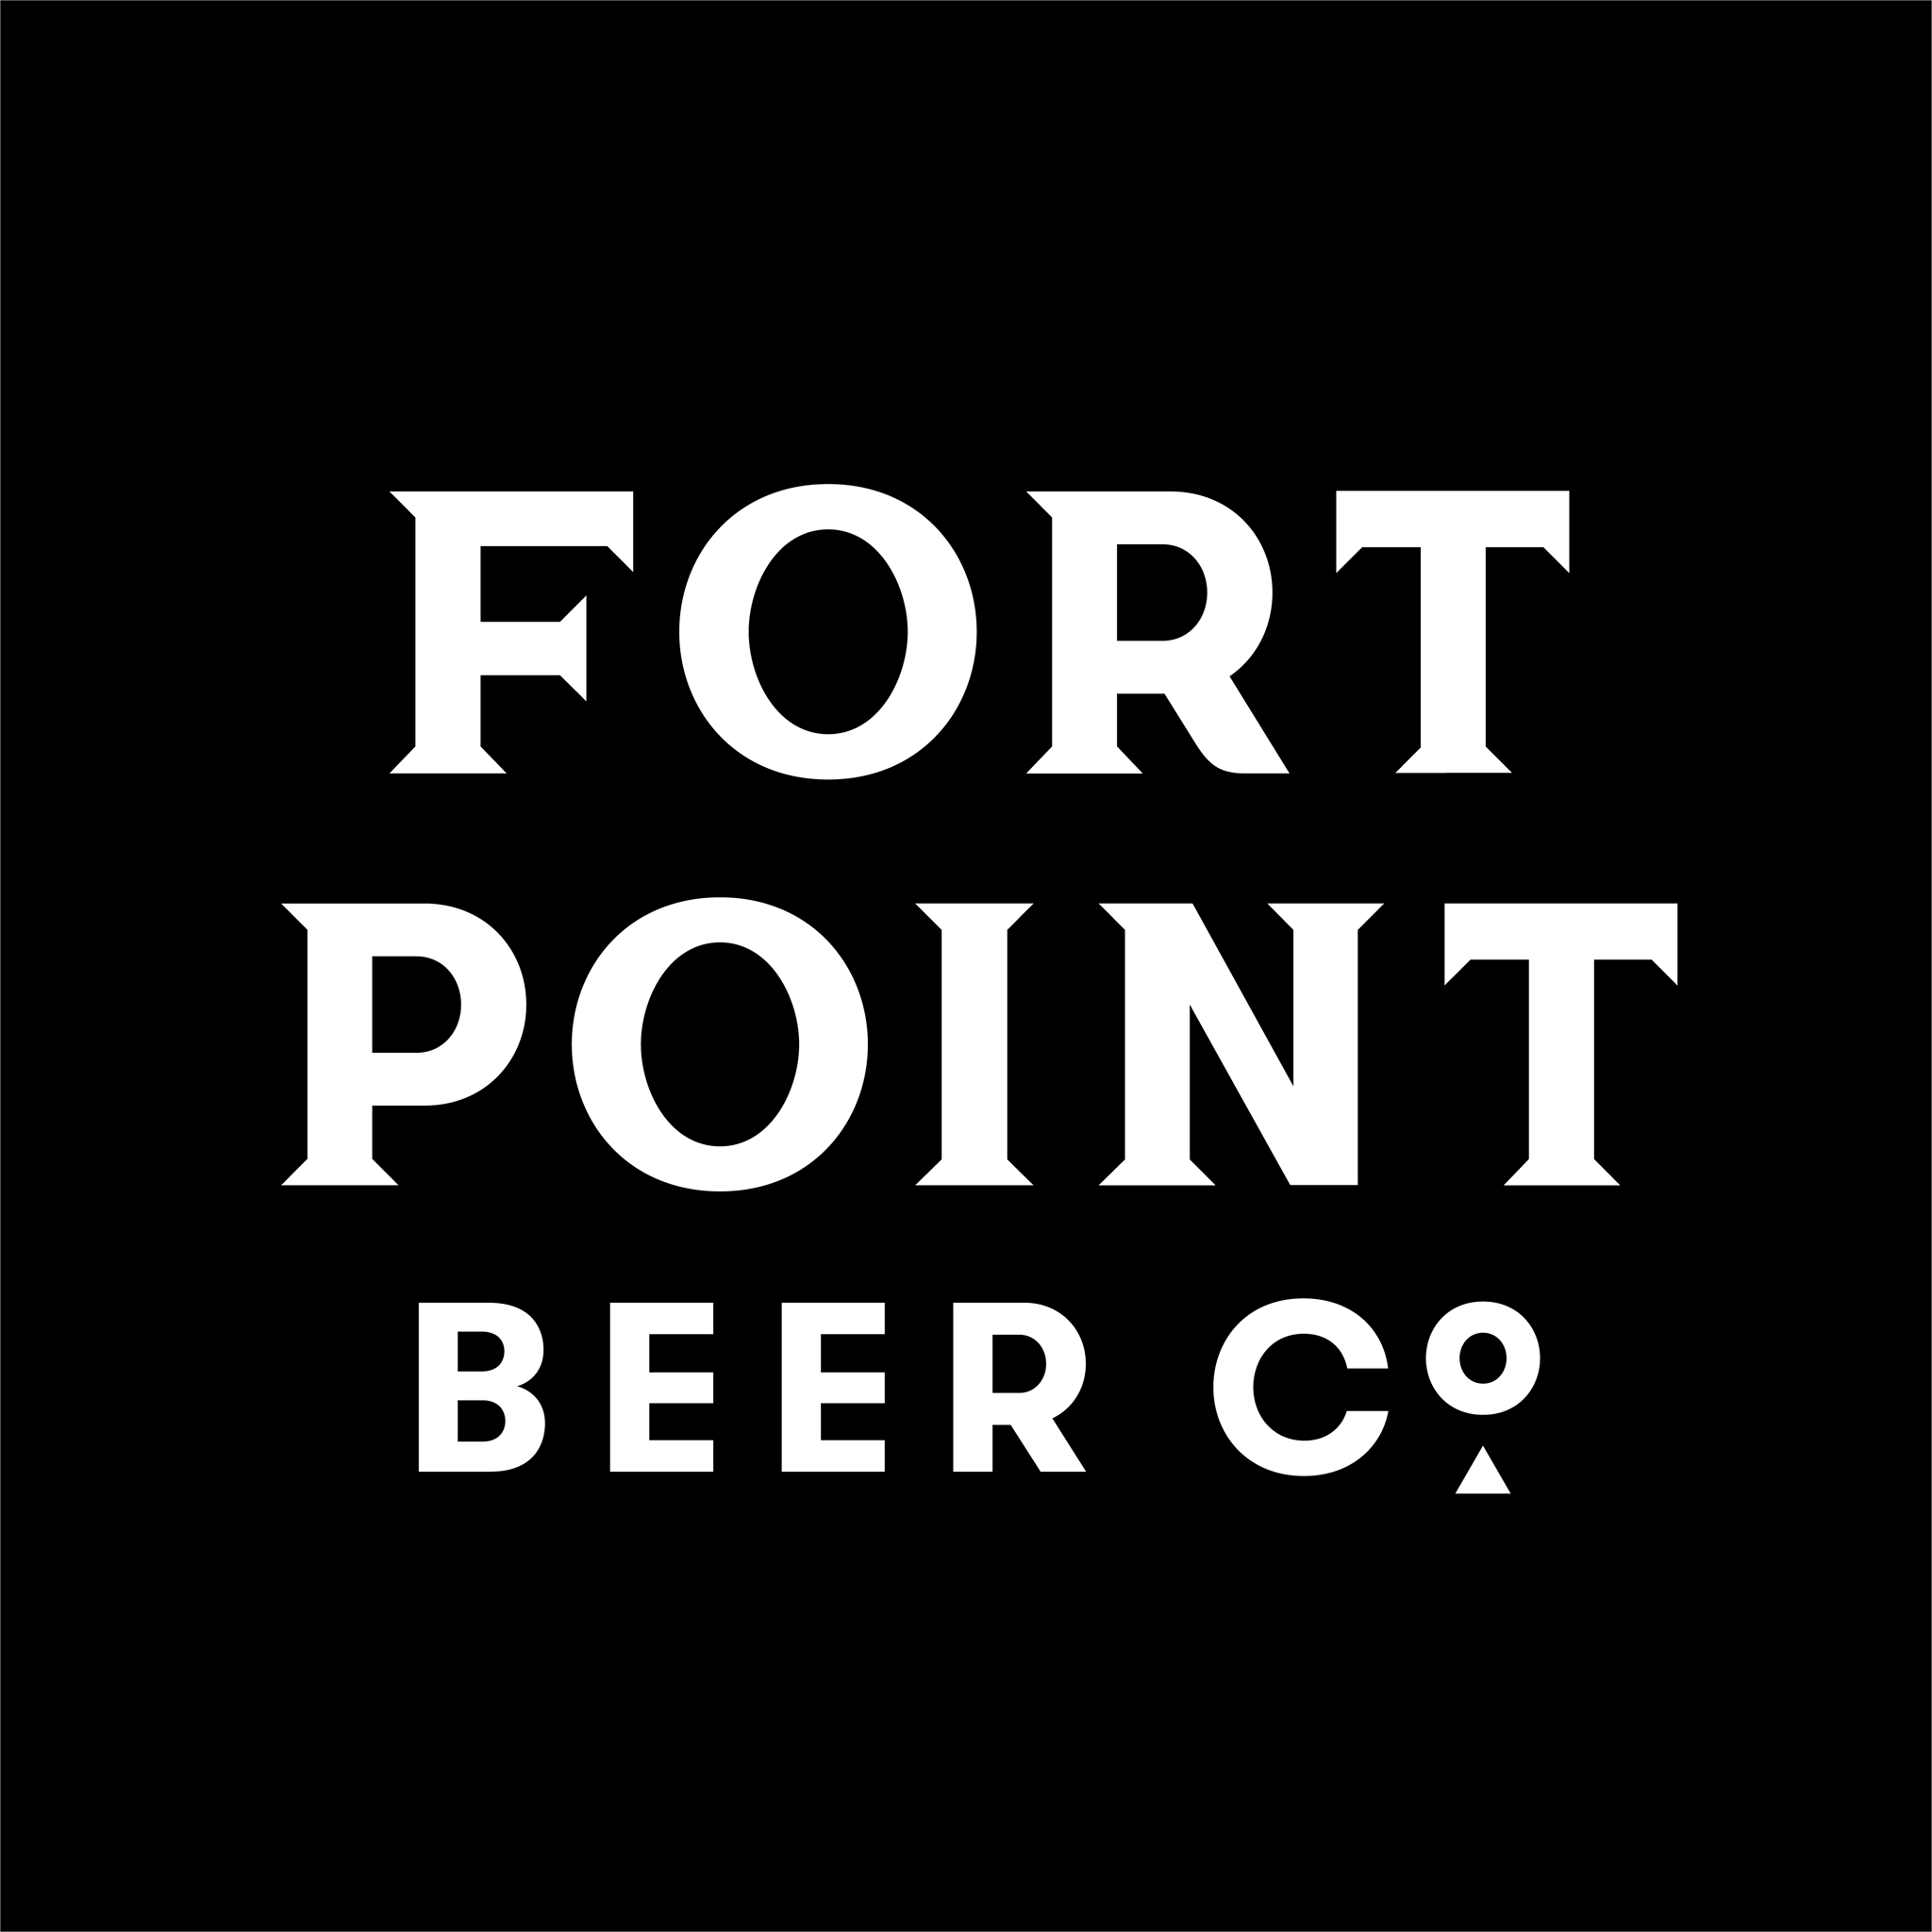 Fort Point Beer Co